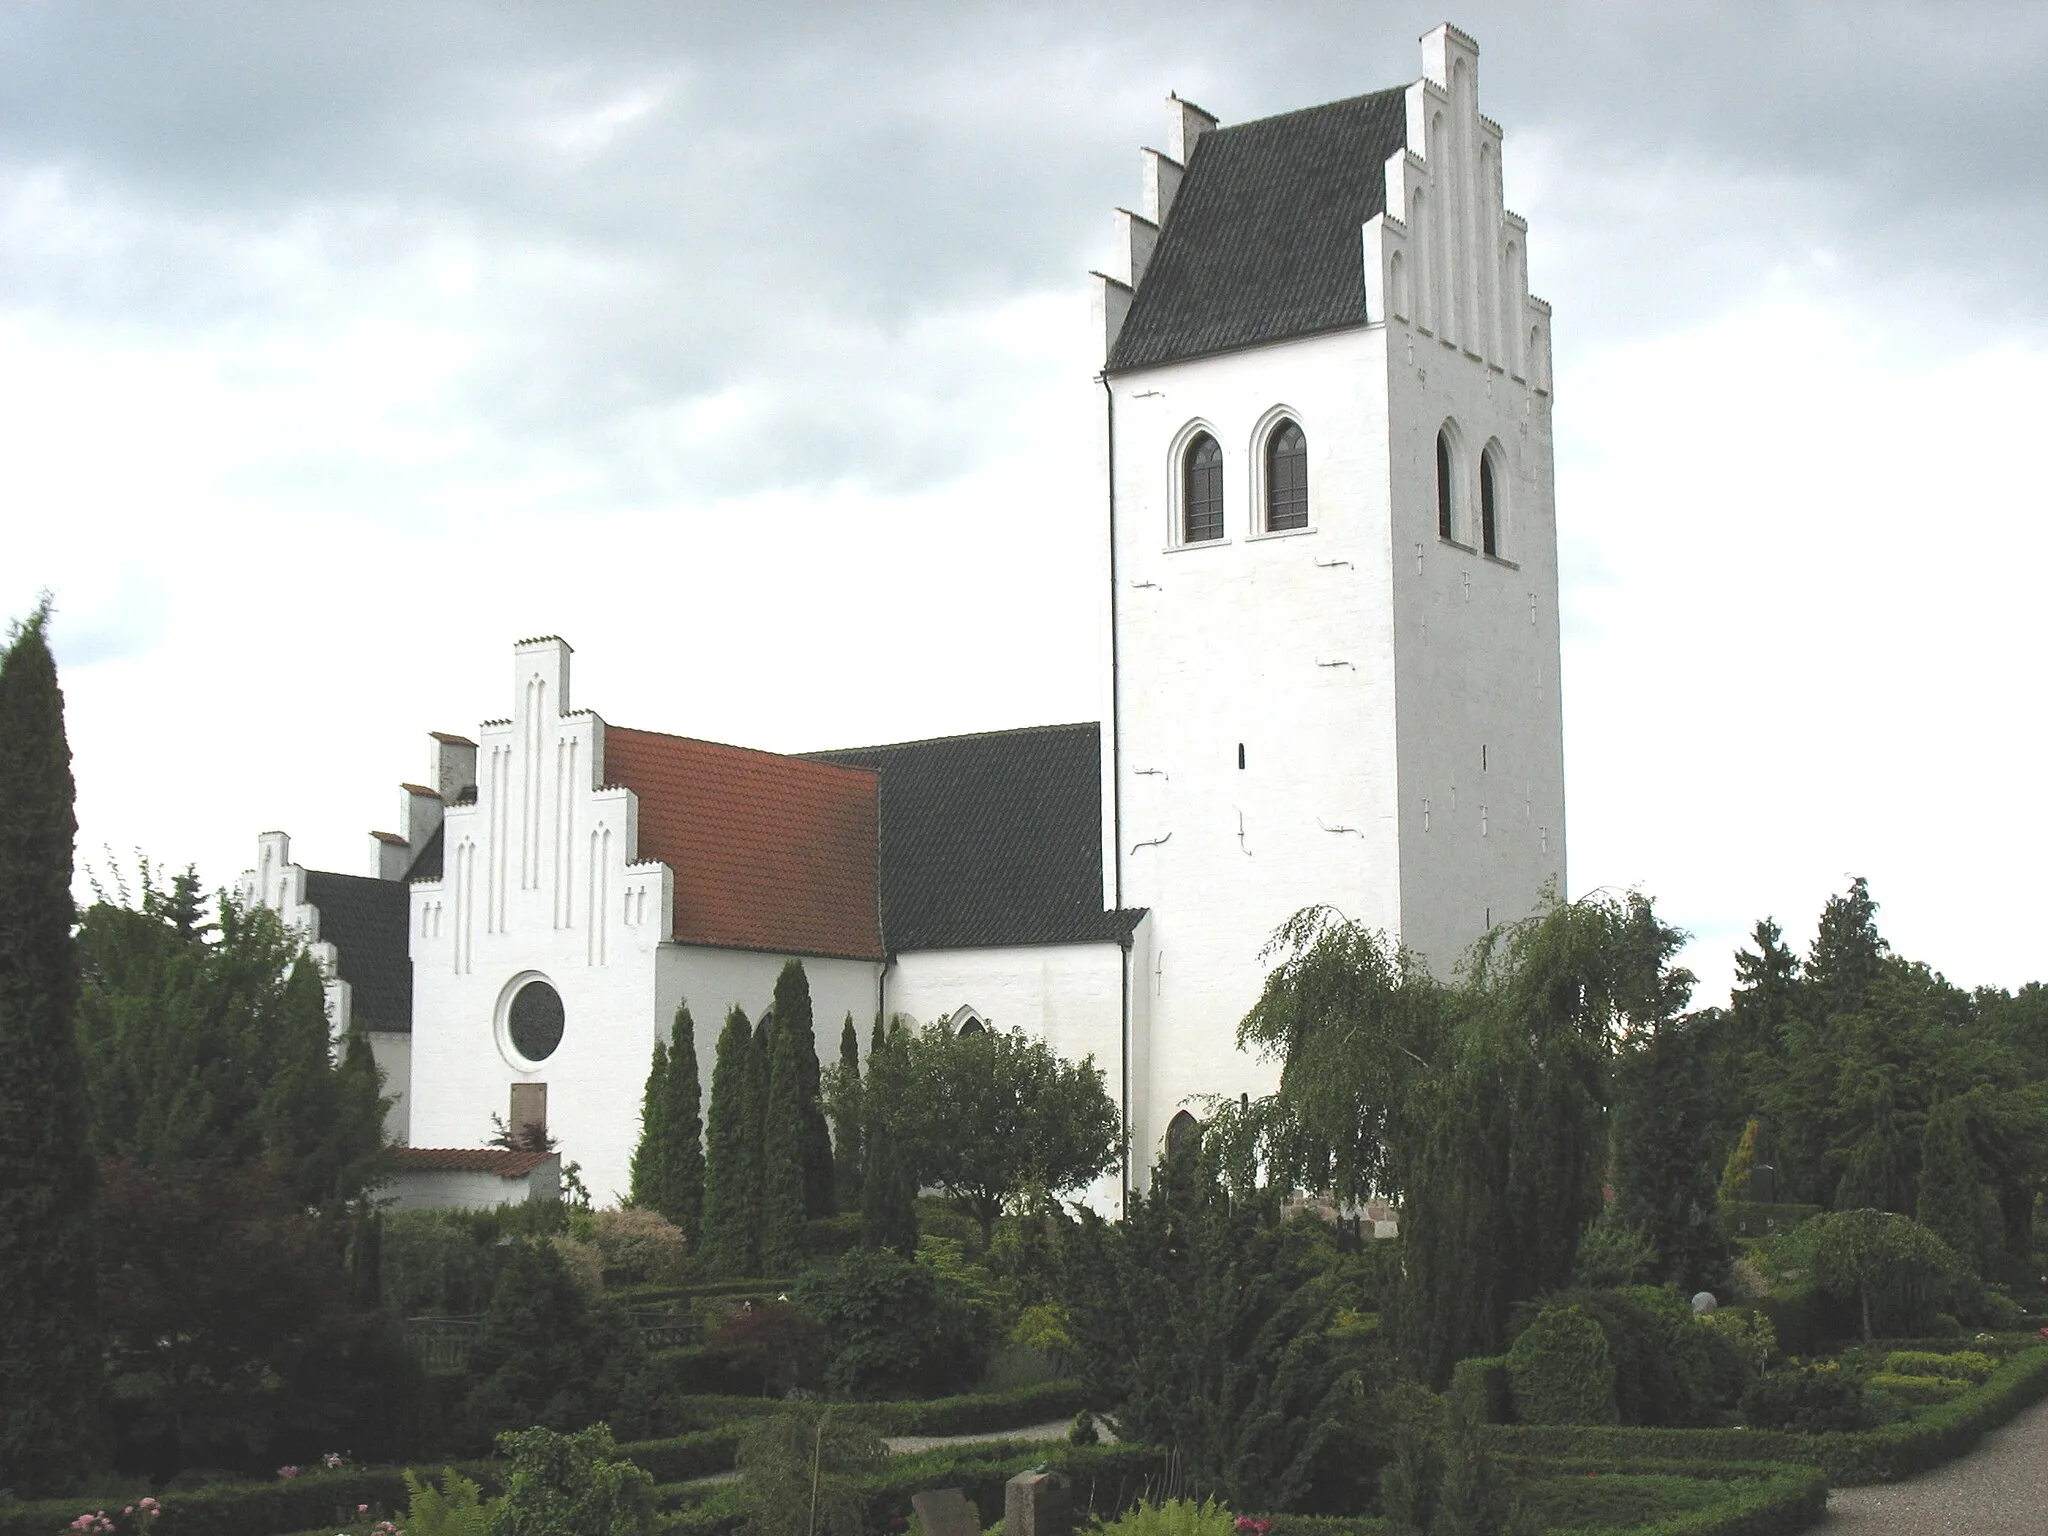 Photo showing: The church "Herfølge Kirke" located in Køge suburb "Herfølge". The location is Middle Zealand in east Denmark.